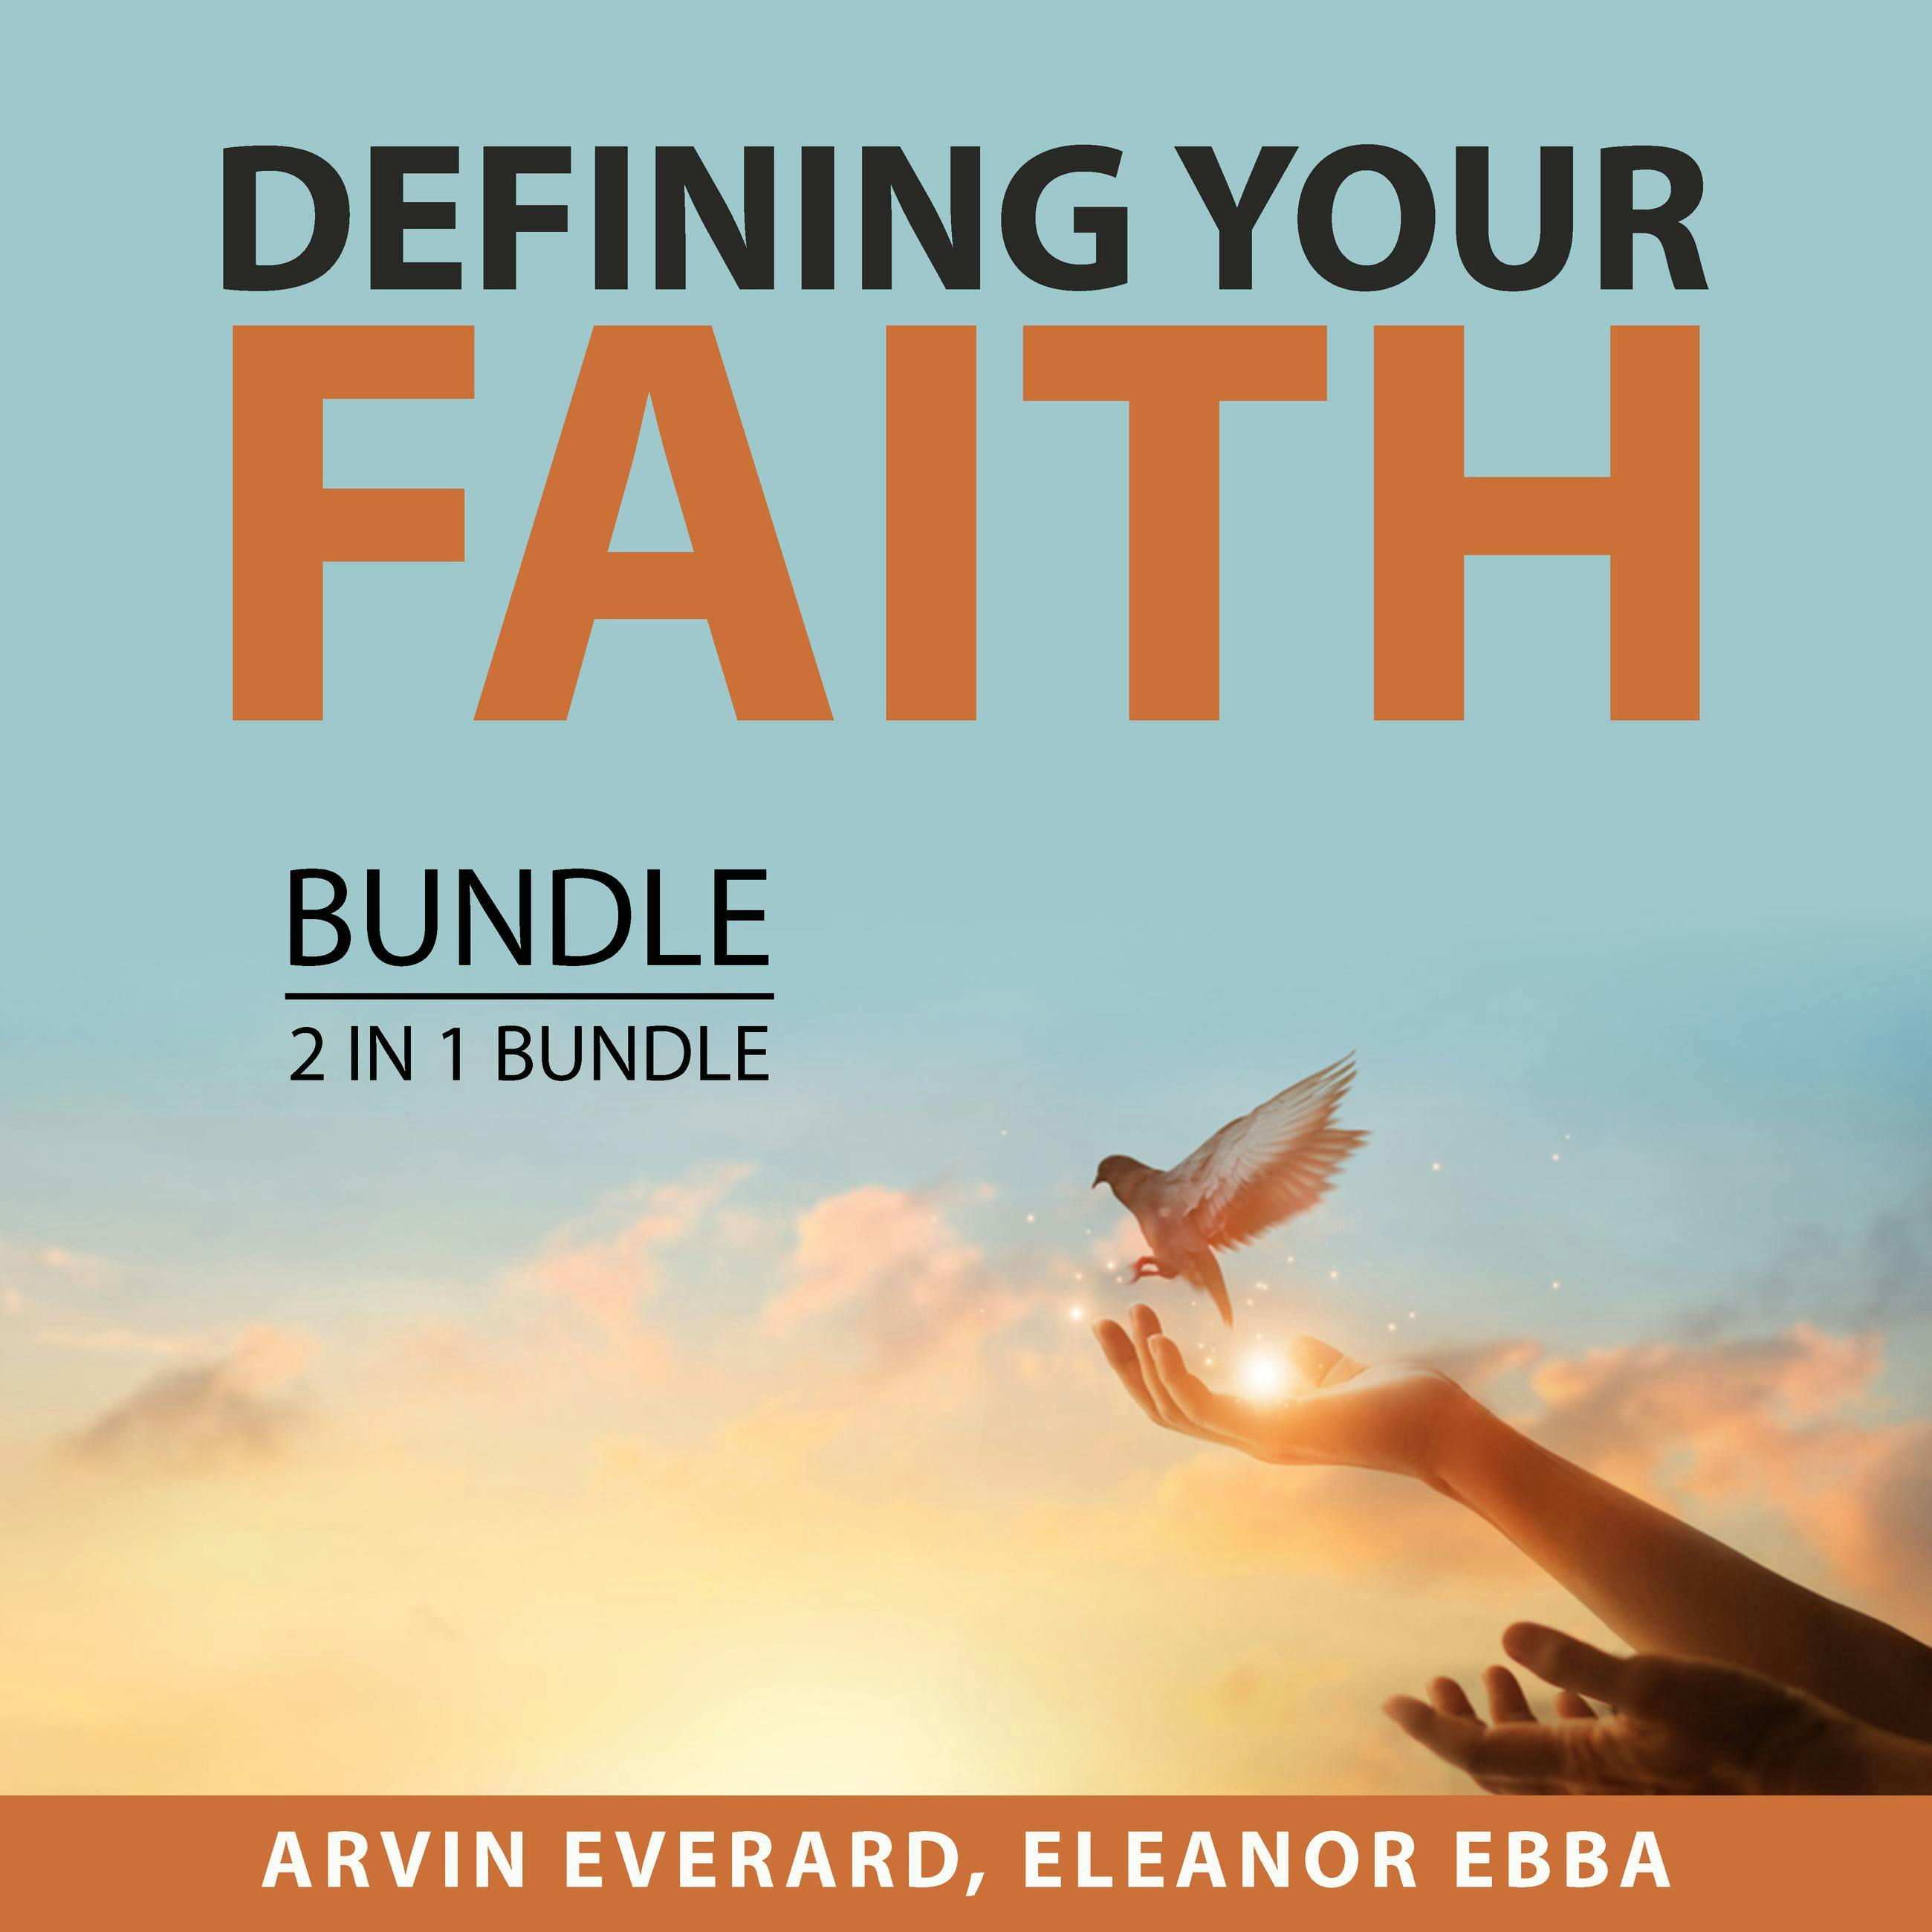 Defining Your Faith Bundle, 2 in 1 Bundle: The Power of Affirmative Prayers and Living by Faith - Arvin Everard, Eleanor Ebba